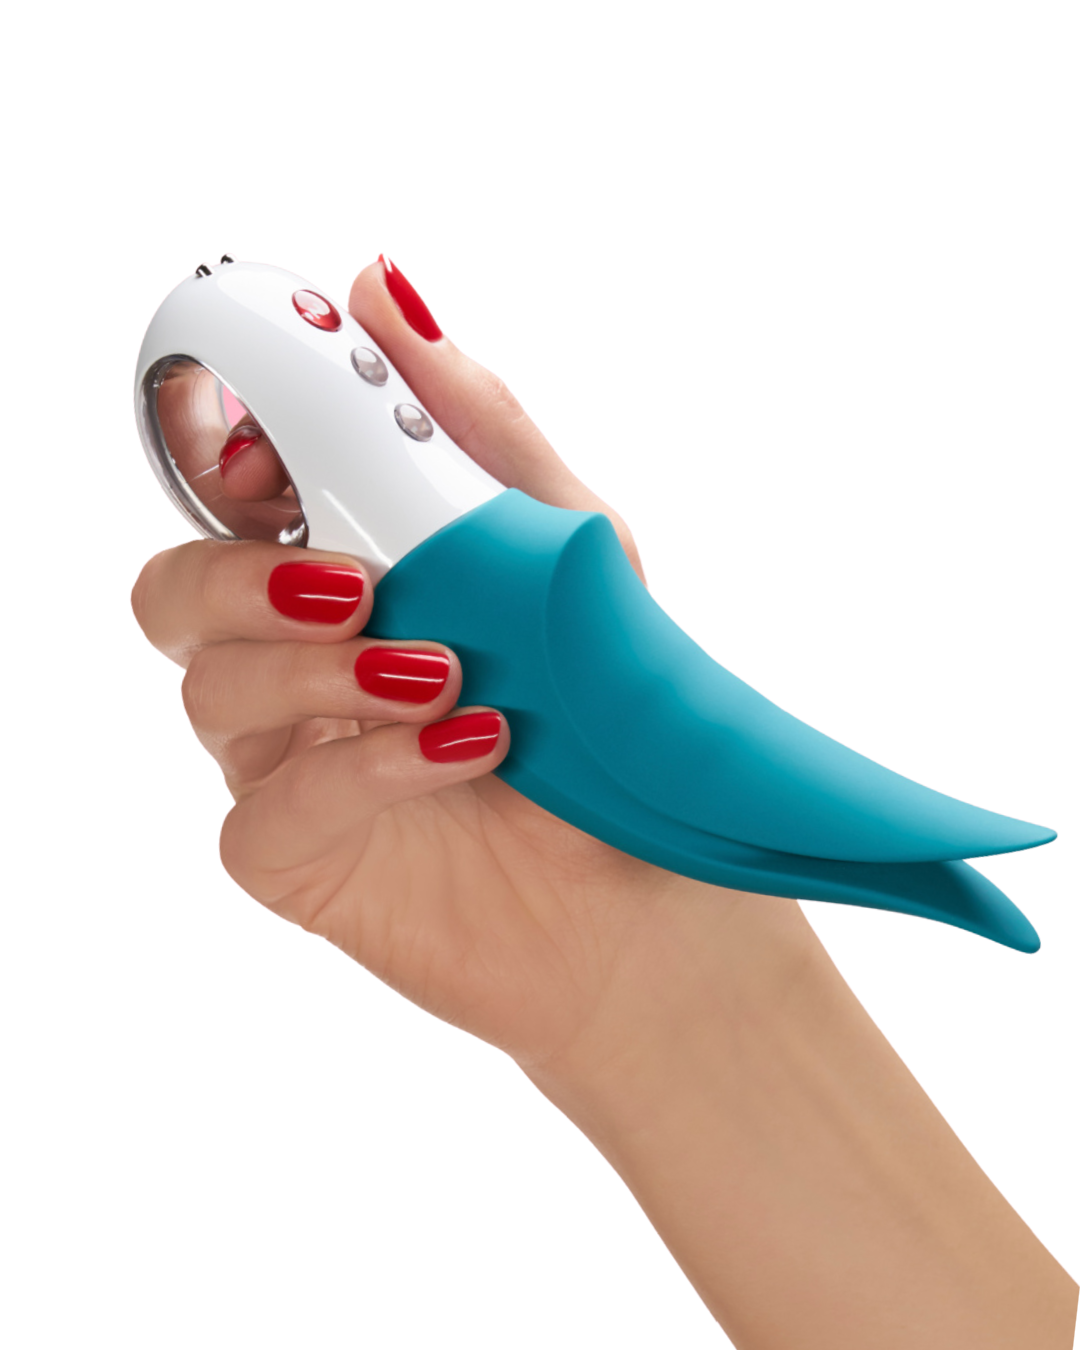 Fun Factory Volta External Vibrator - blue held in a woman's hand to show the size